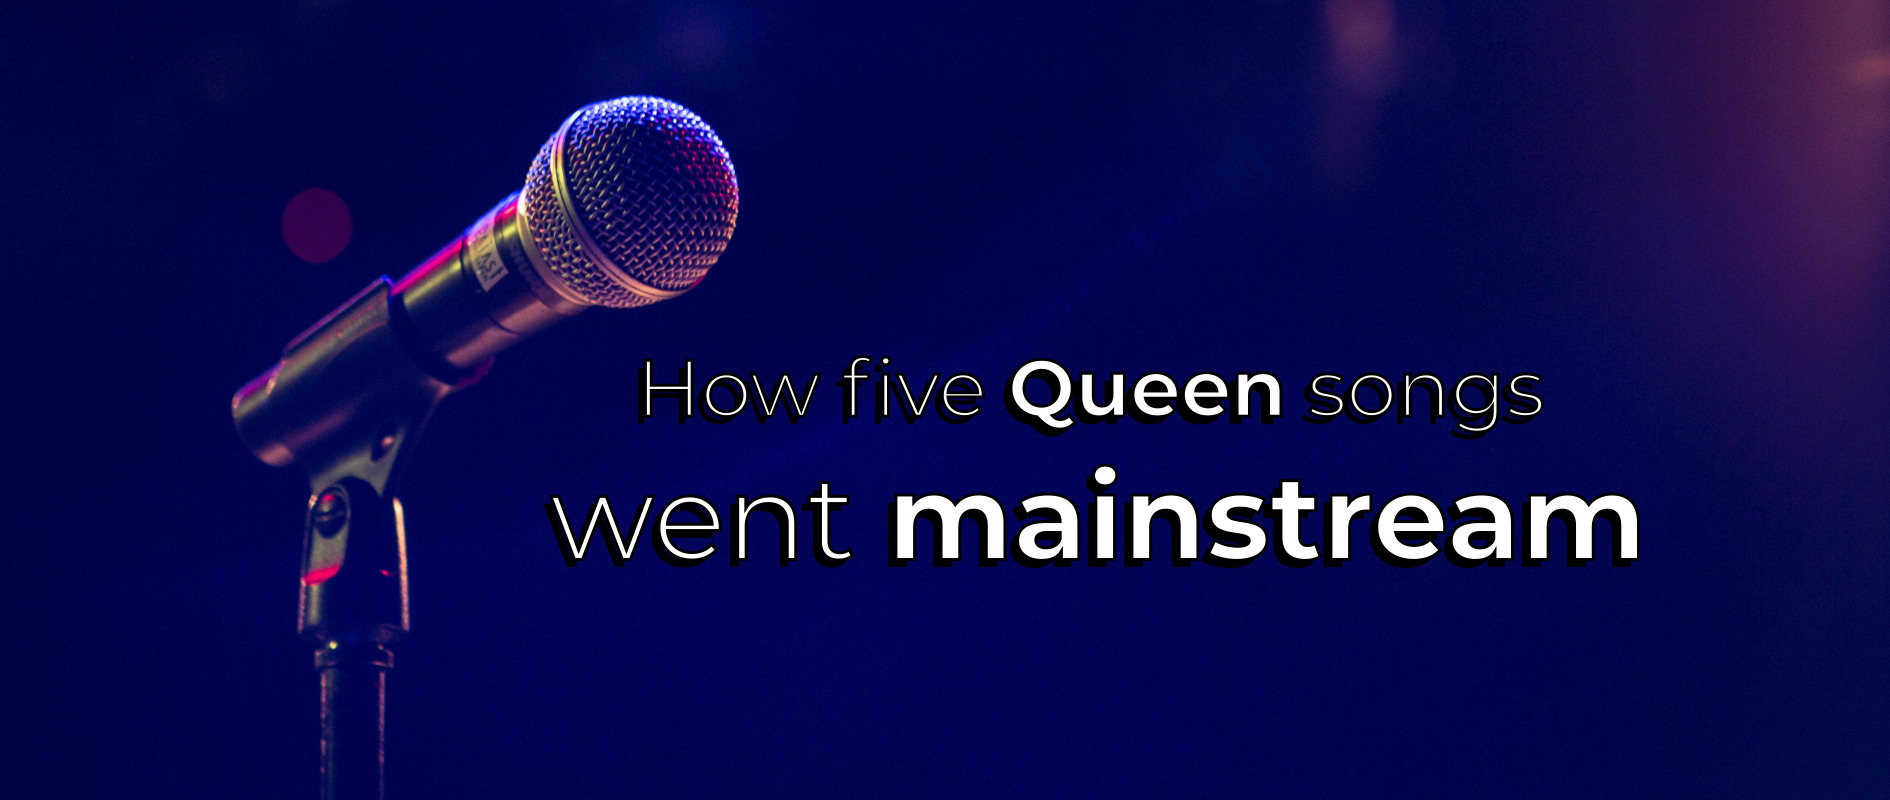 How five Queen songs went mainstream in totally different ways